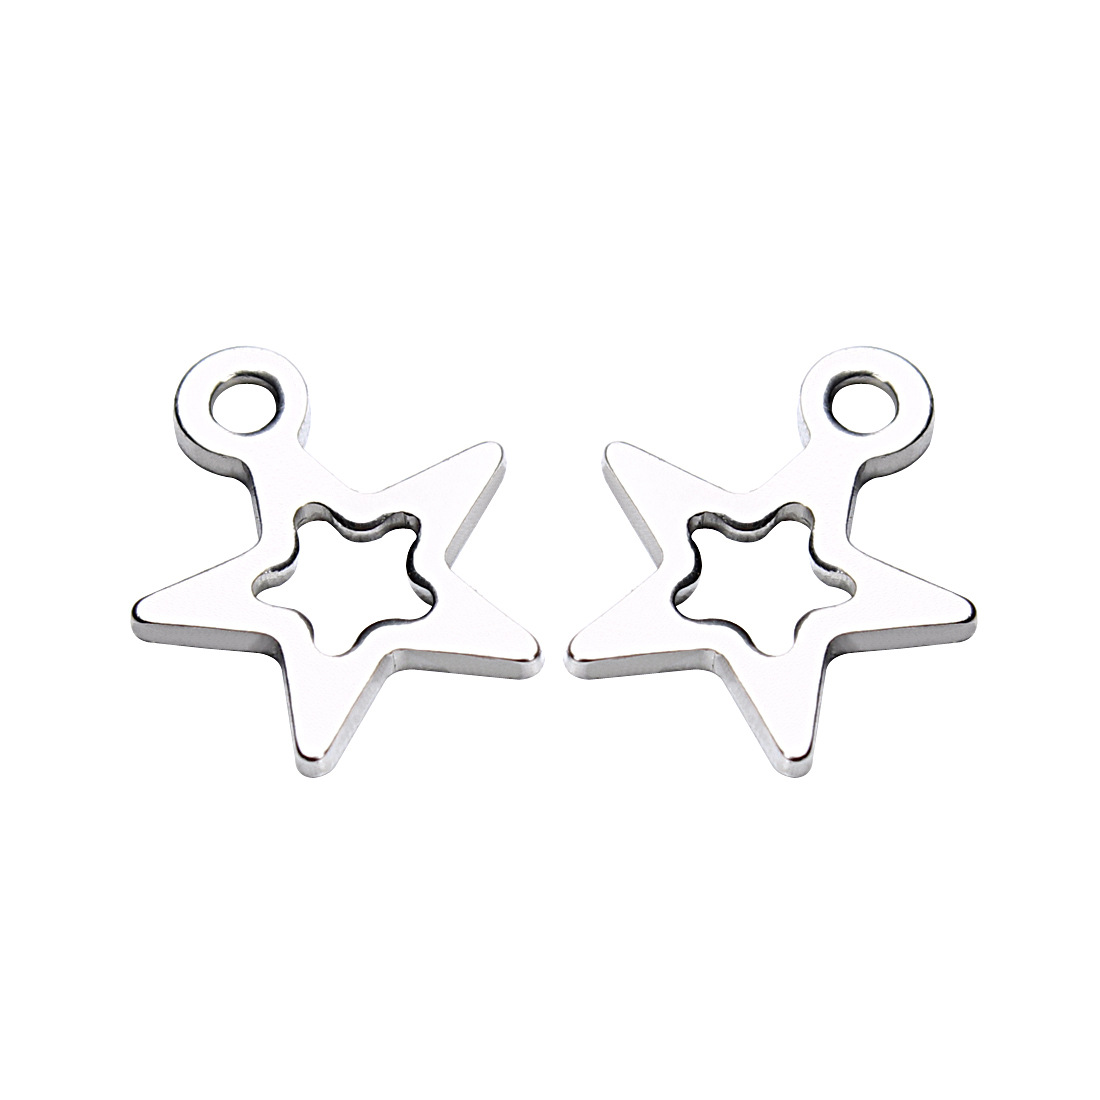 Five-pointed star, 8x10mm, 100 pcs/pack